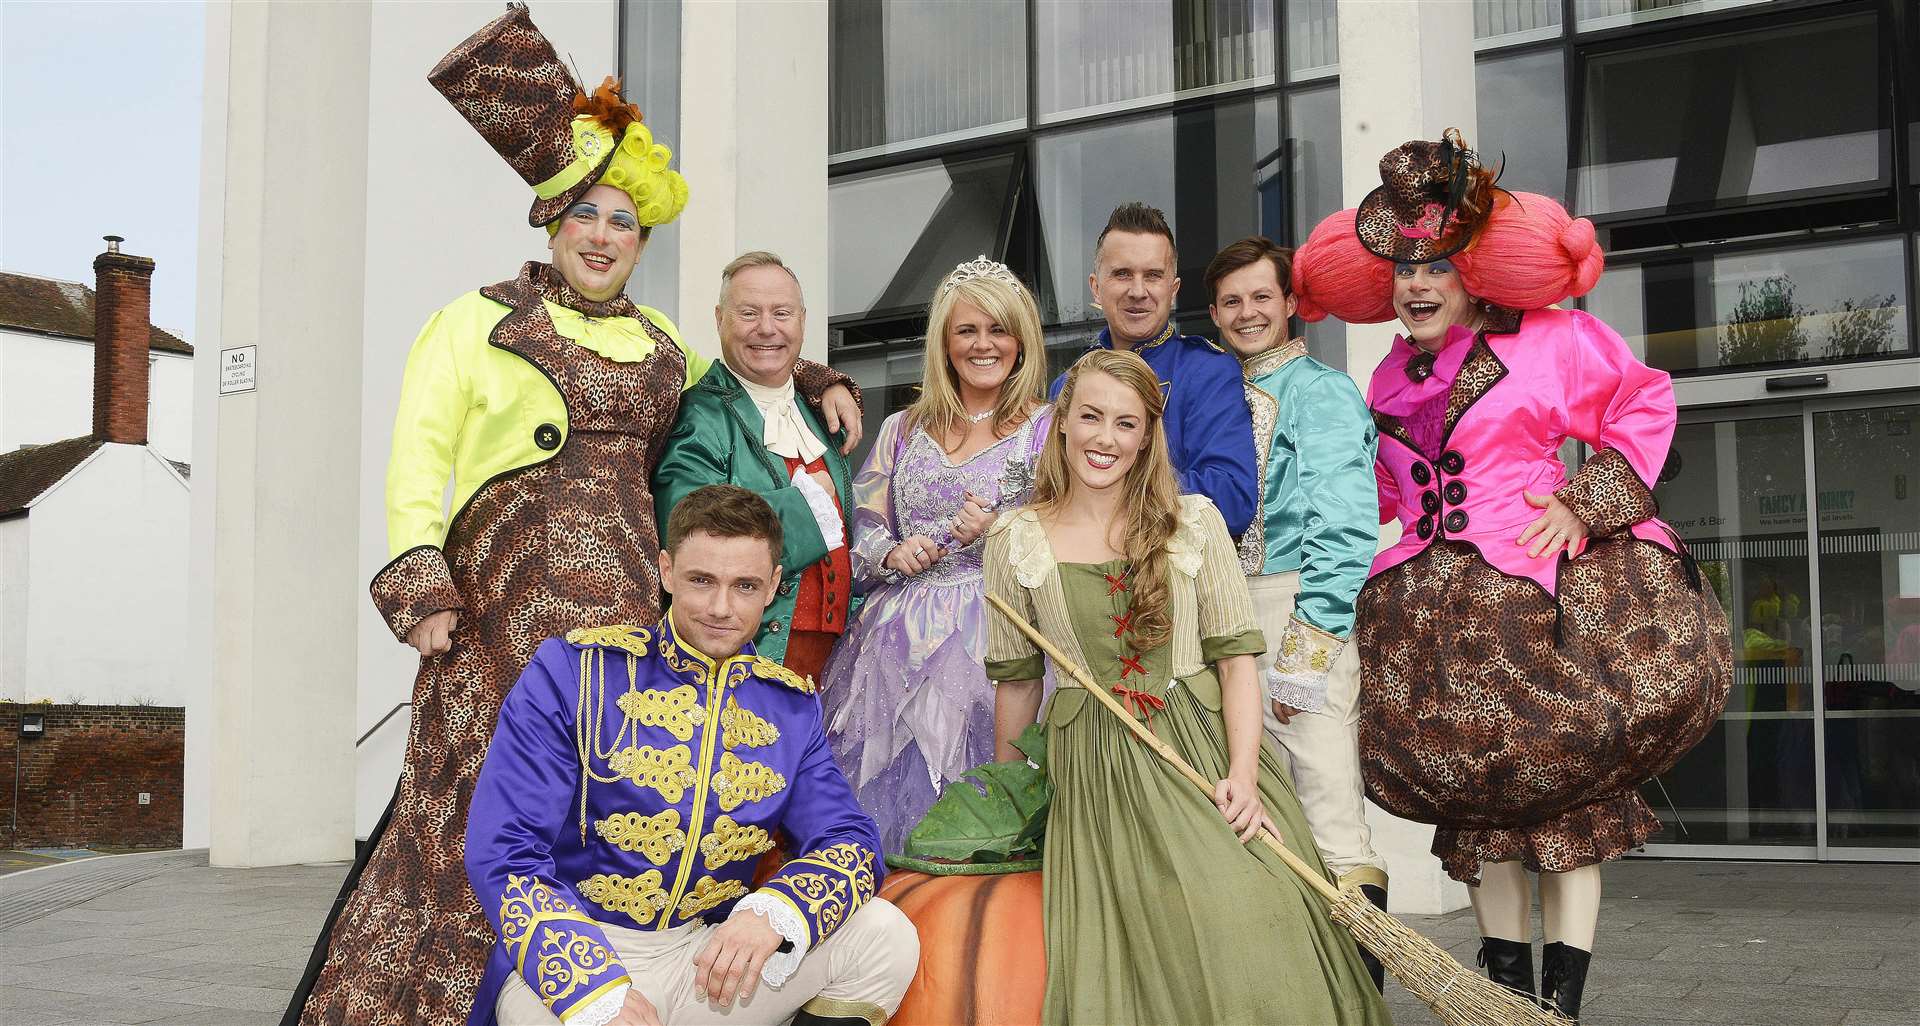 The Cinderella cast outside the Marlowe Theatre, Canterbury Picture: Paul Amos